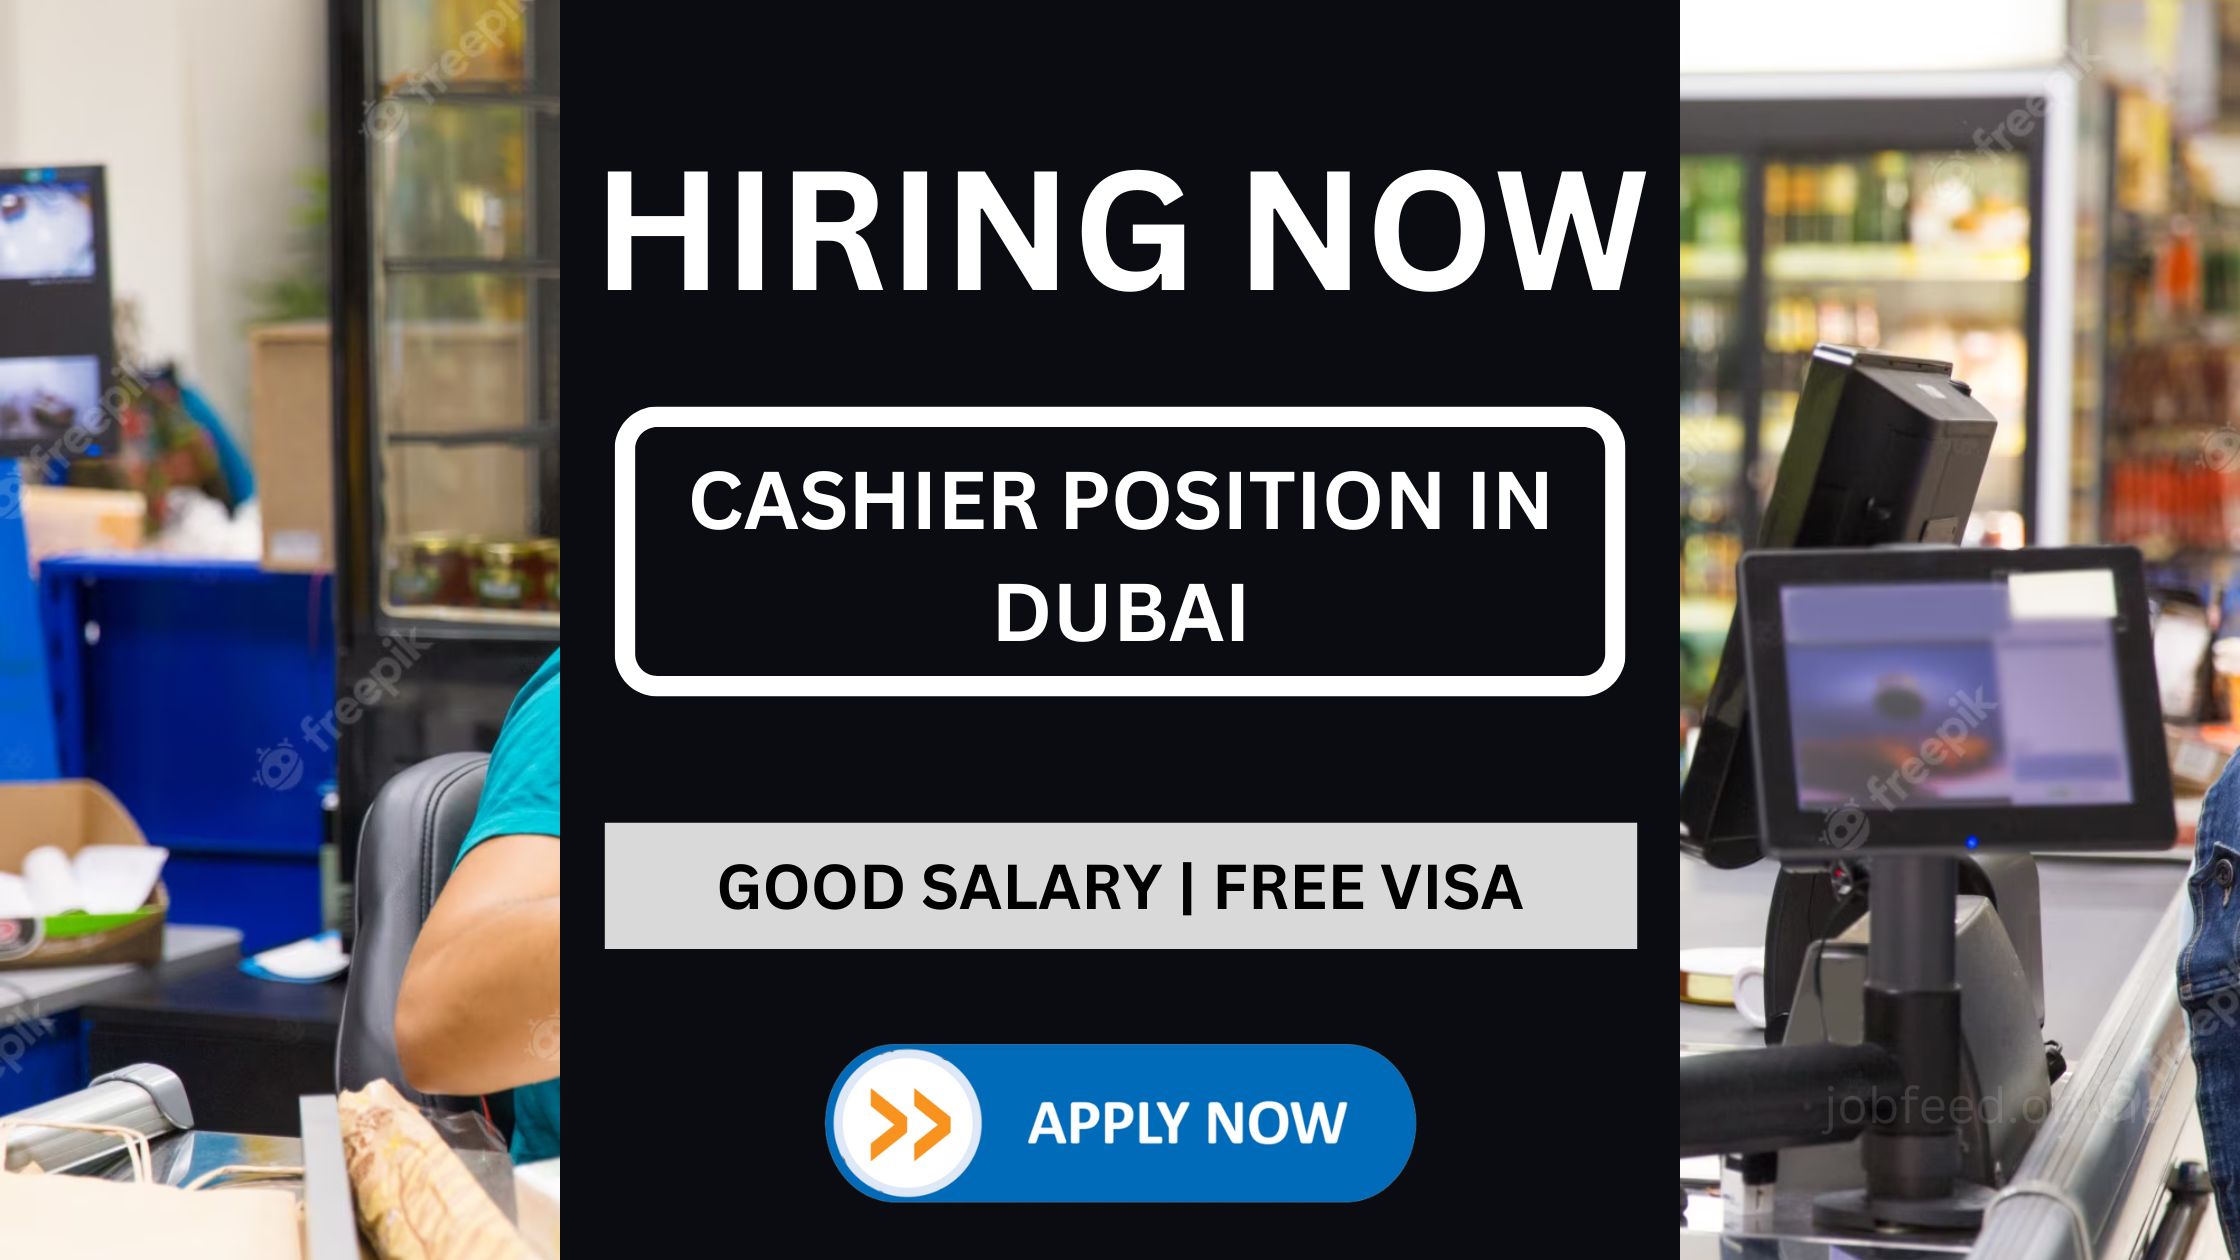 Job Opening: Cashier Position in Dubai with Accommodation, Food, and Visa